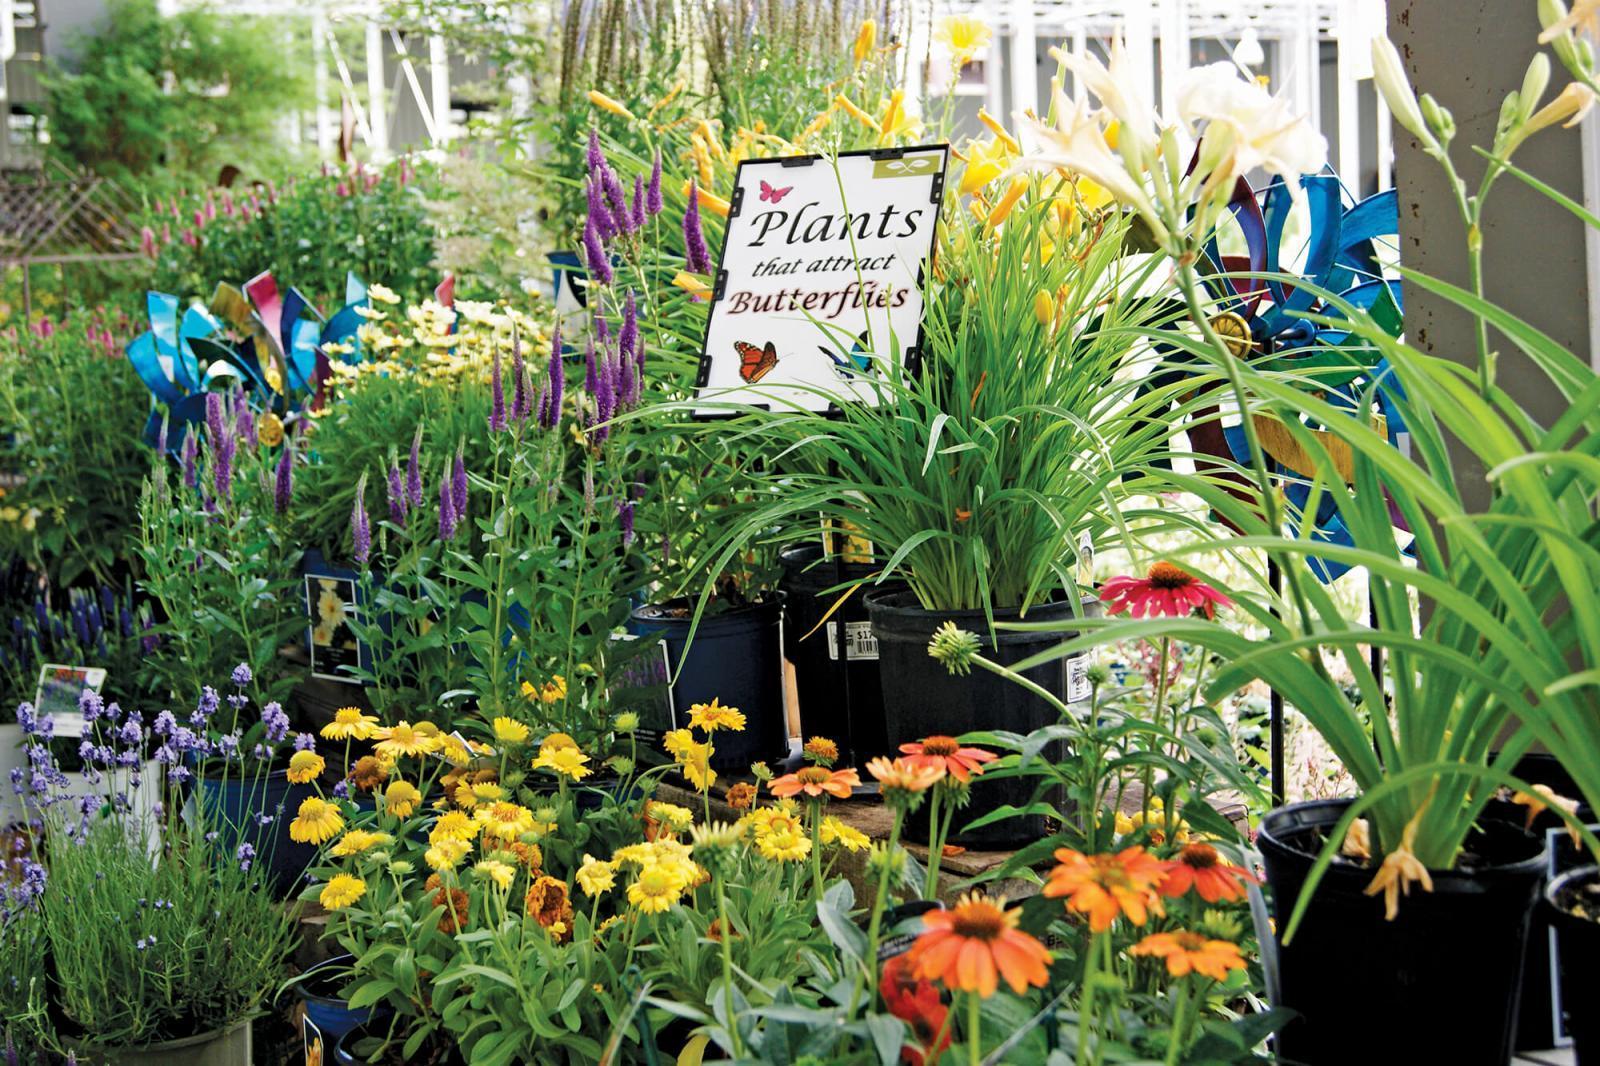 Suggesting emotional connections to plants consistently promotes sales.